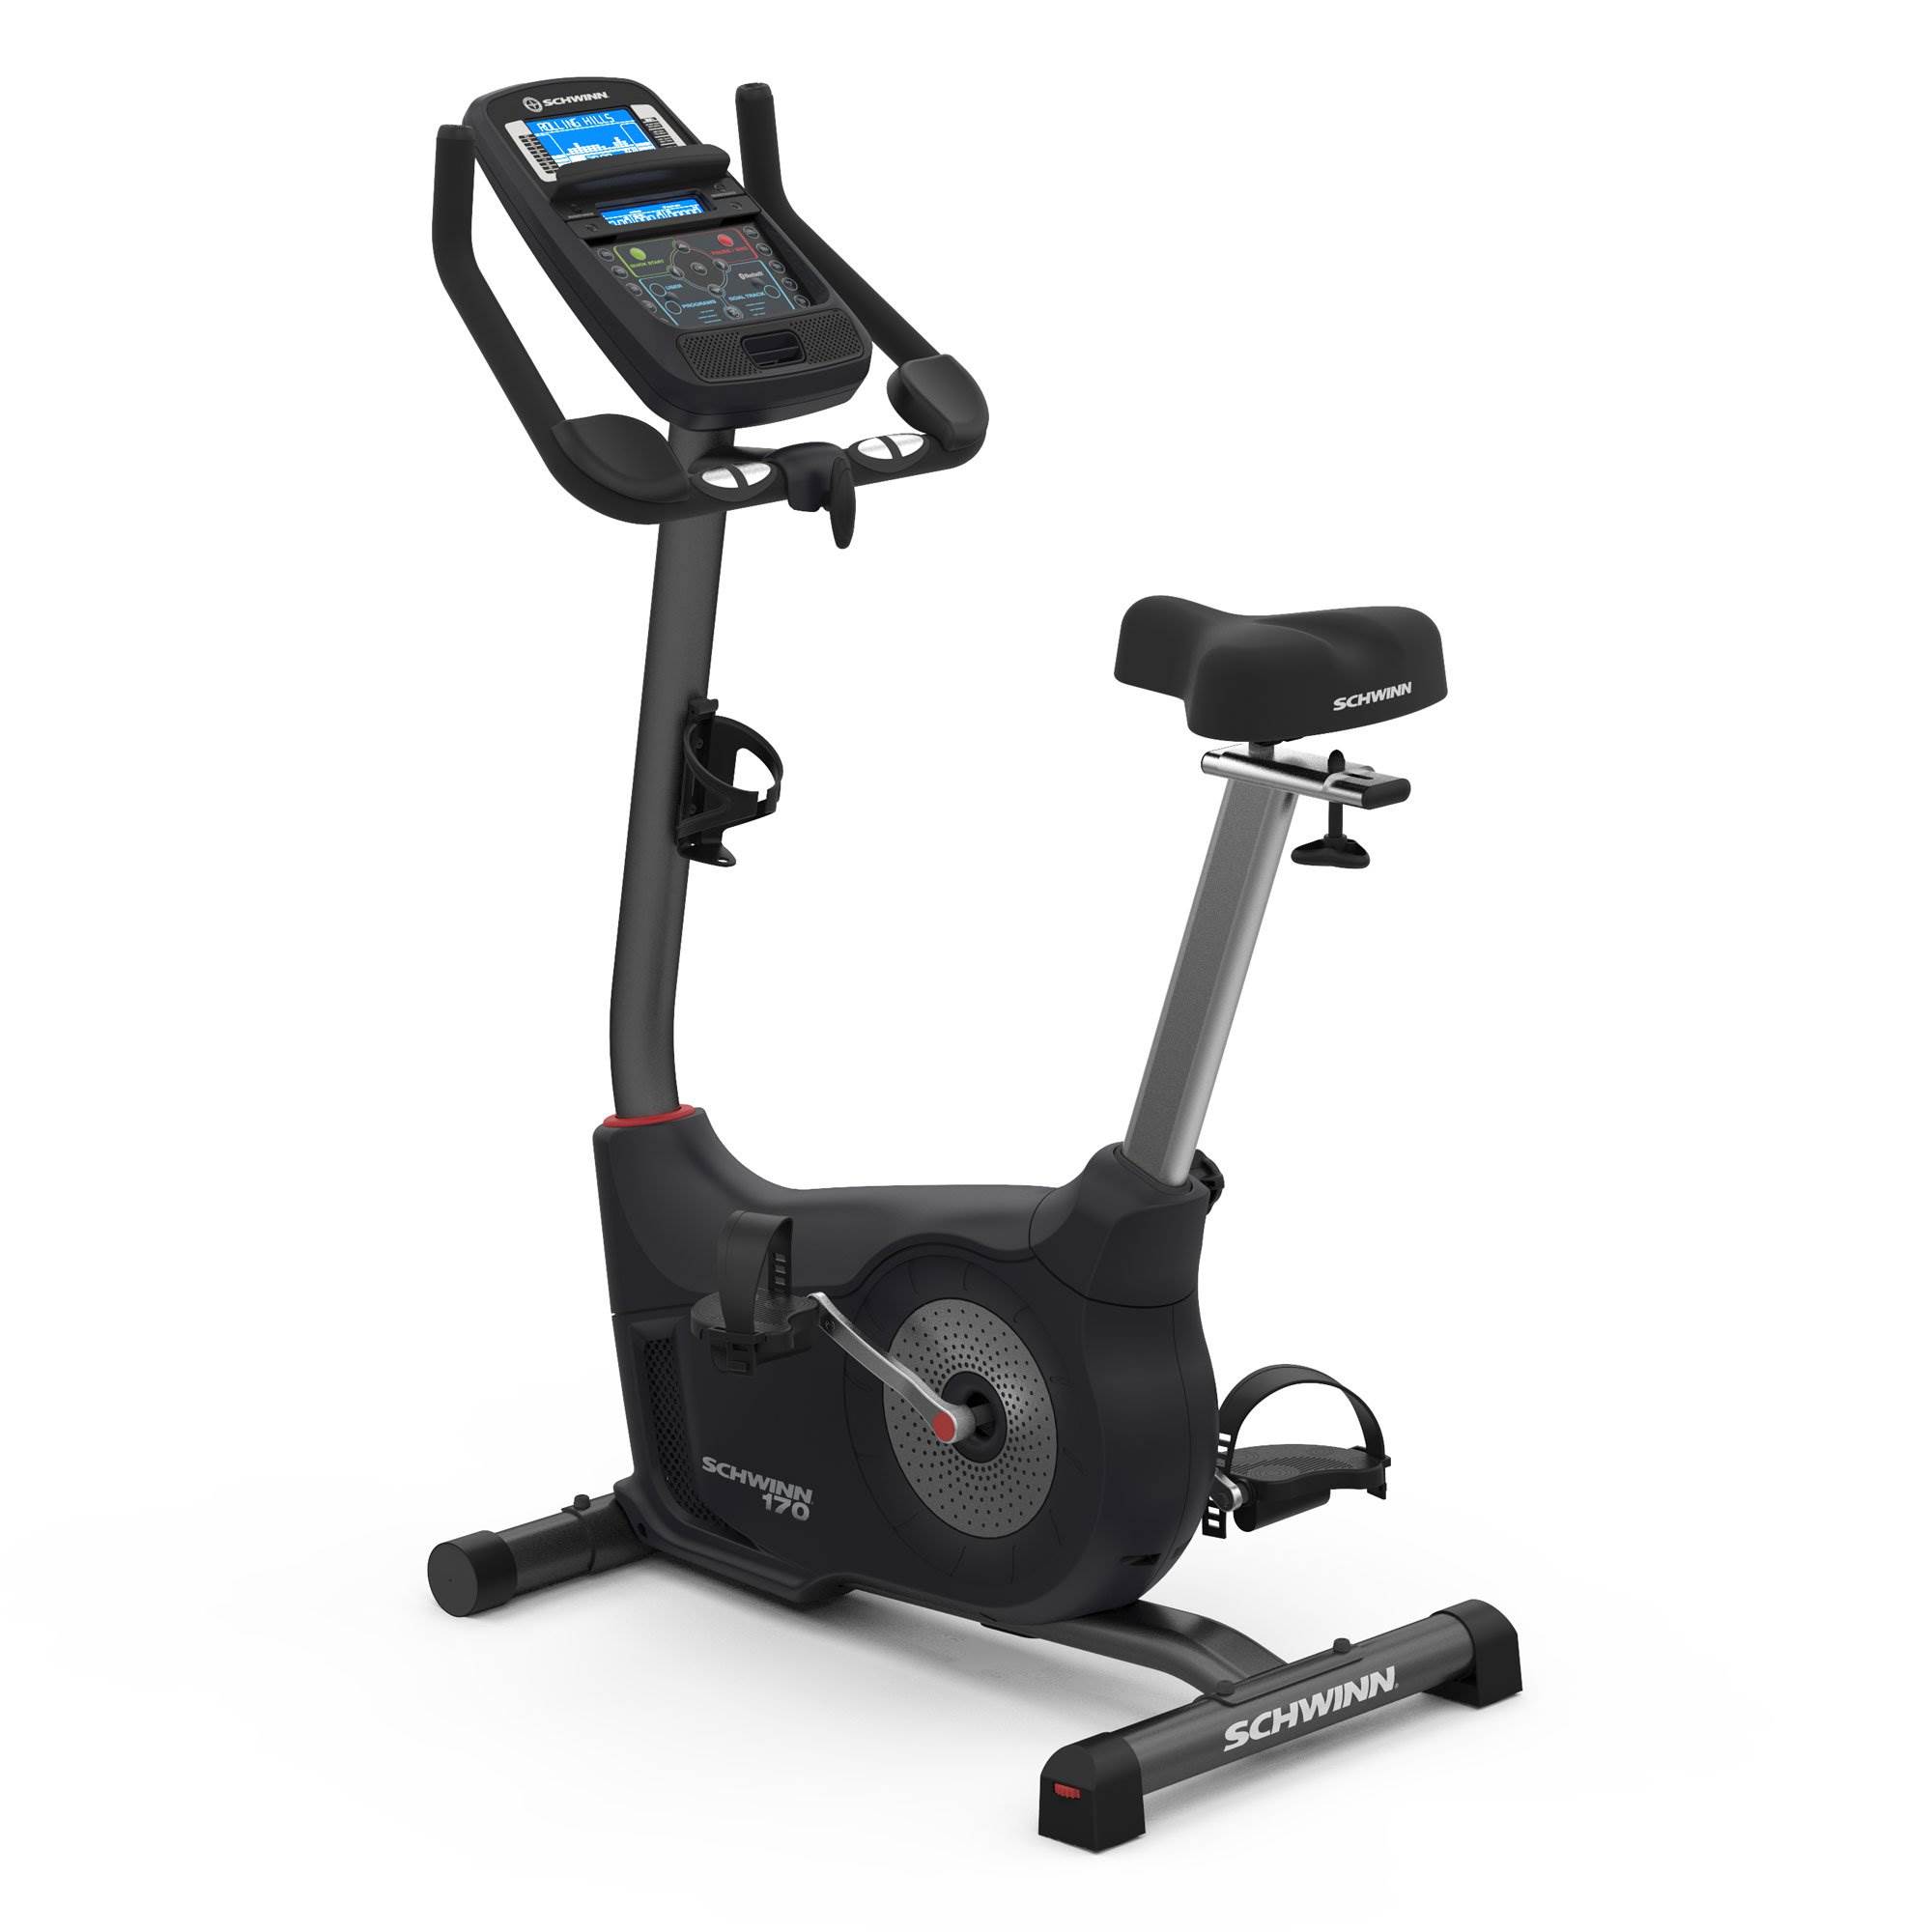 Schwinn Fitness 170 Home Workout Stationary Upright Exercise Bike w/ Explore the World Compatibility - image 1 of 14